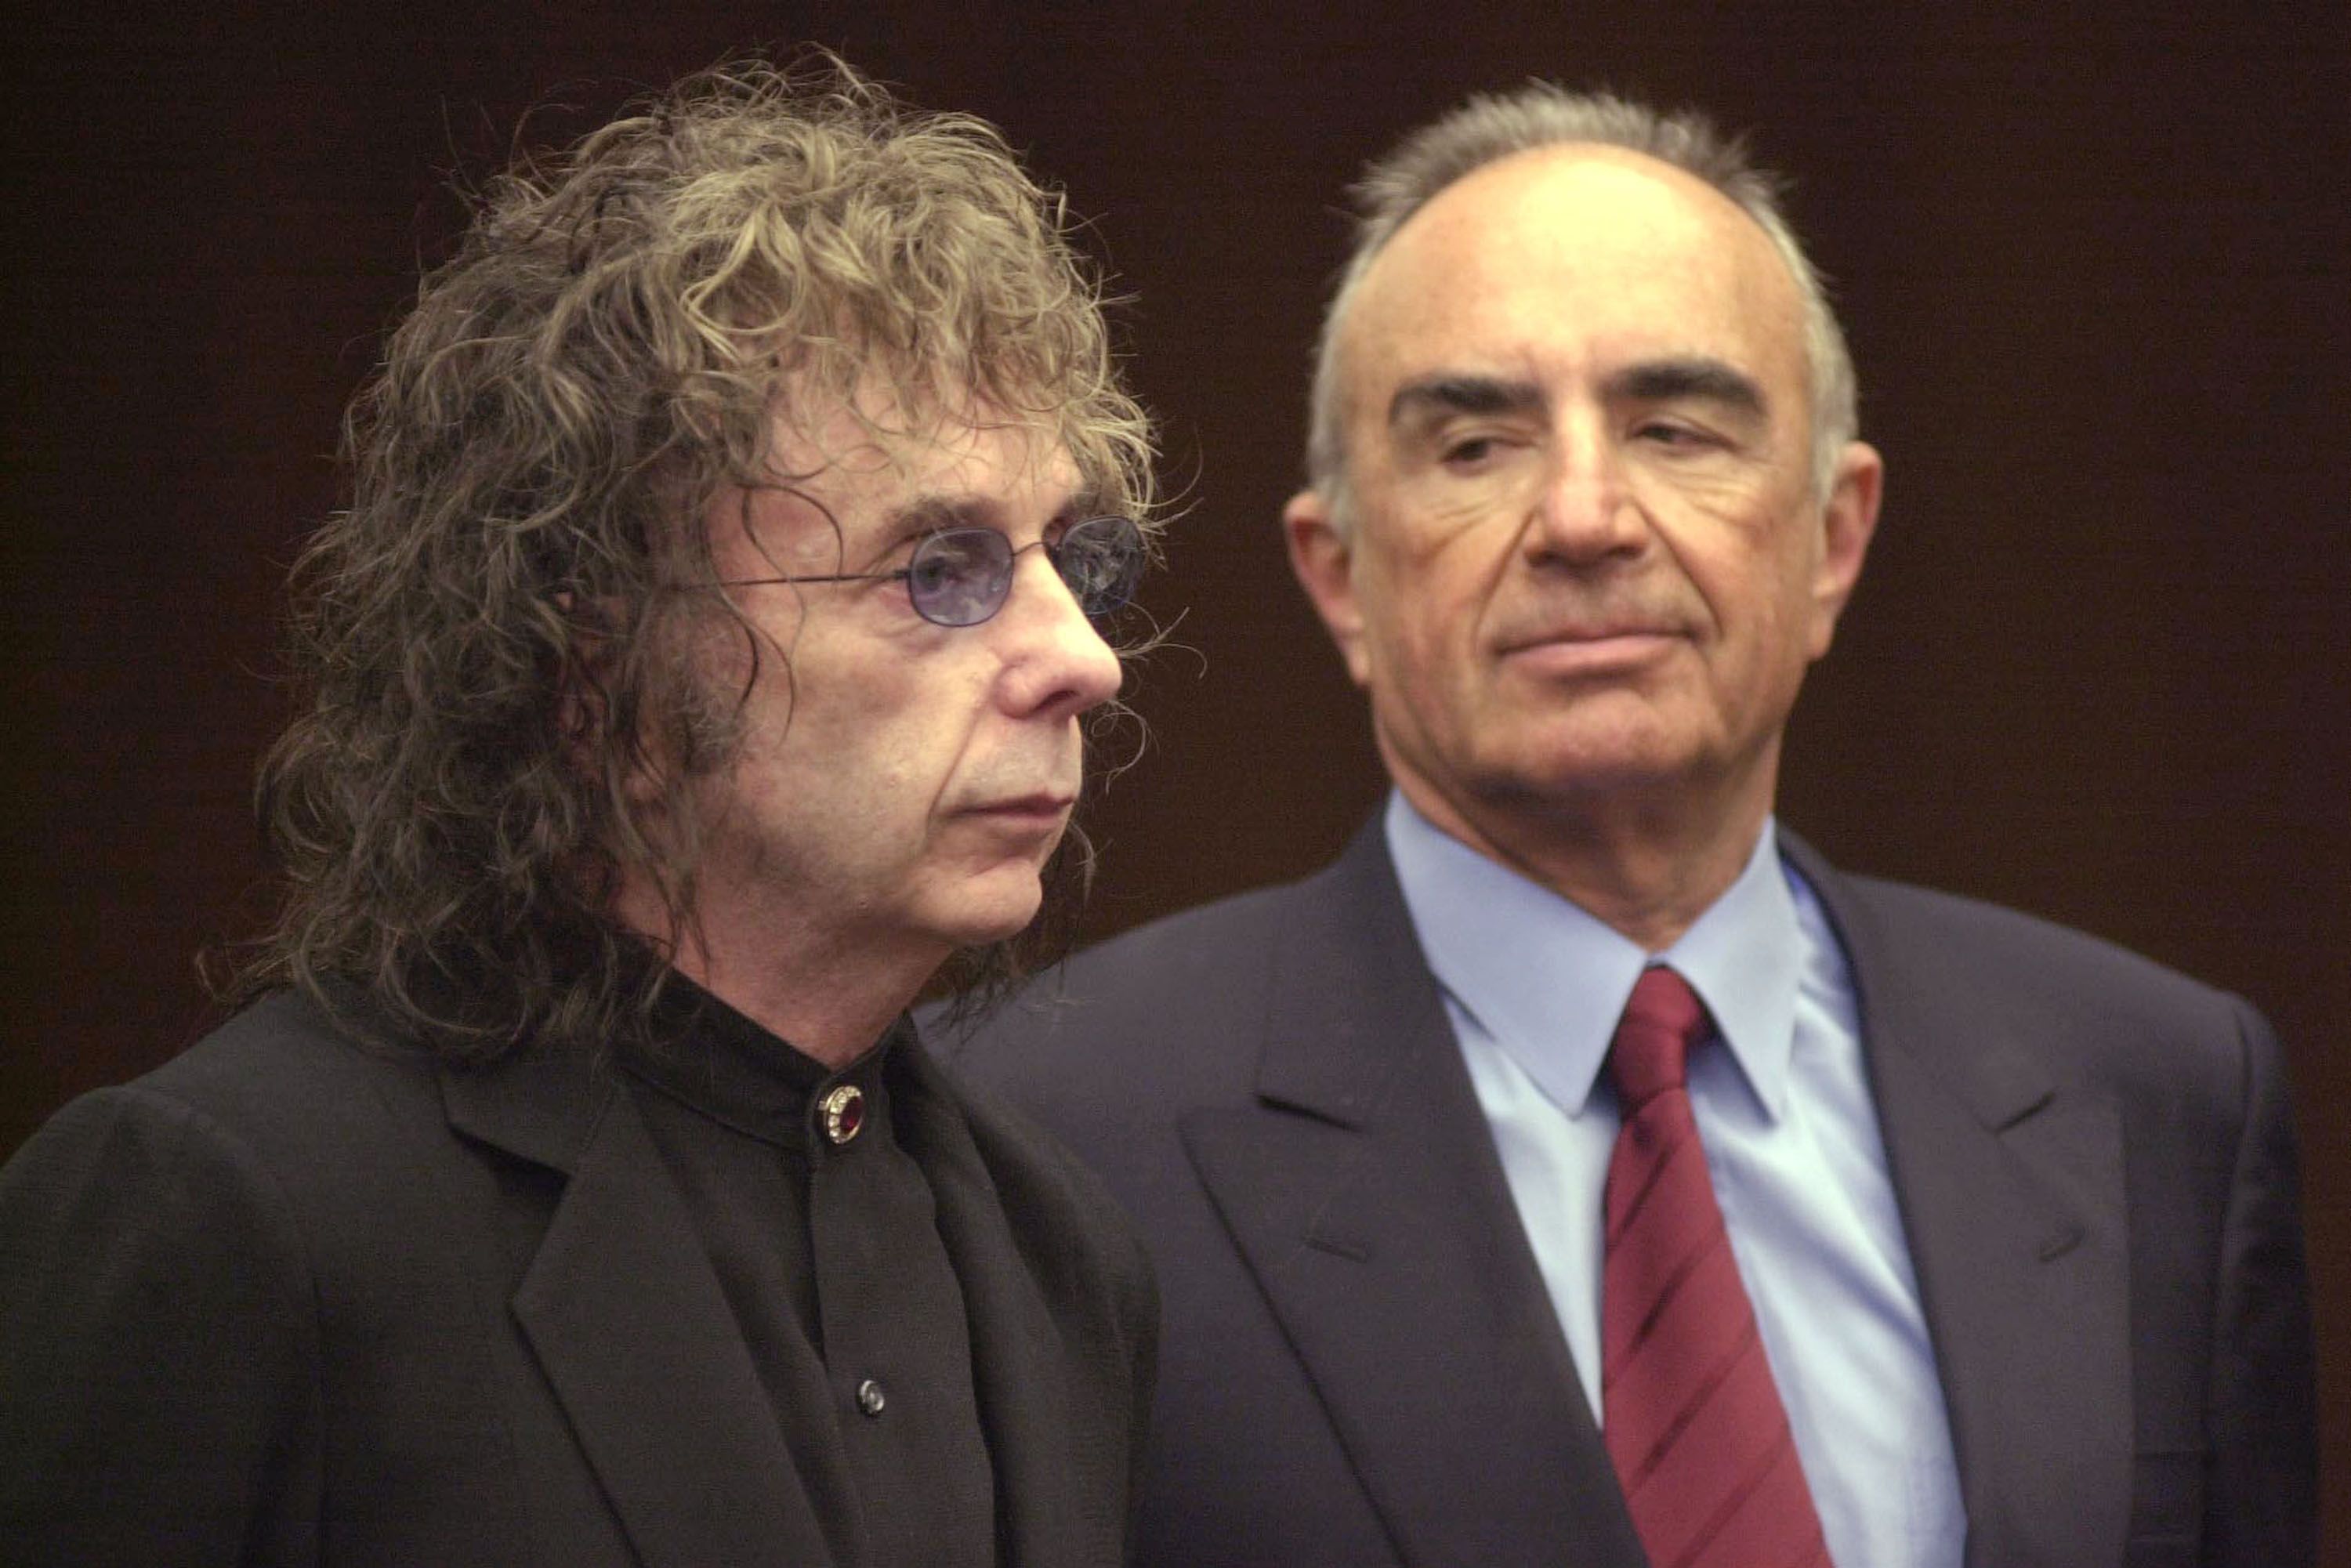 The True Story of Phil Spector and the Murder of Lana Clarkson